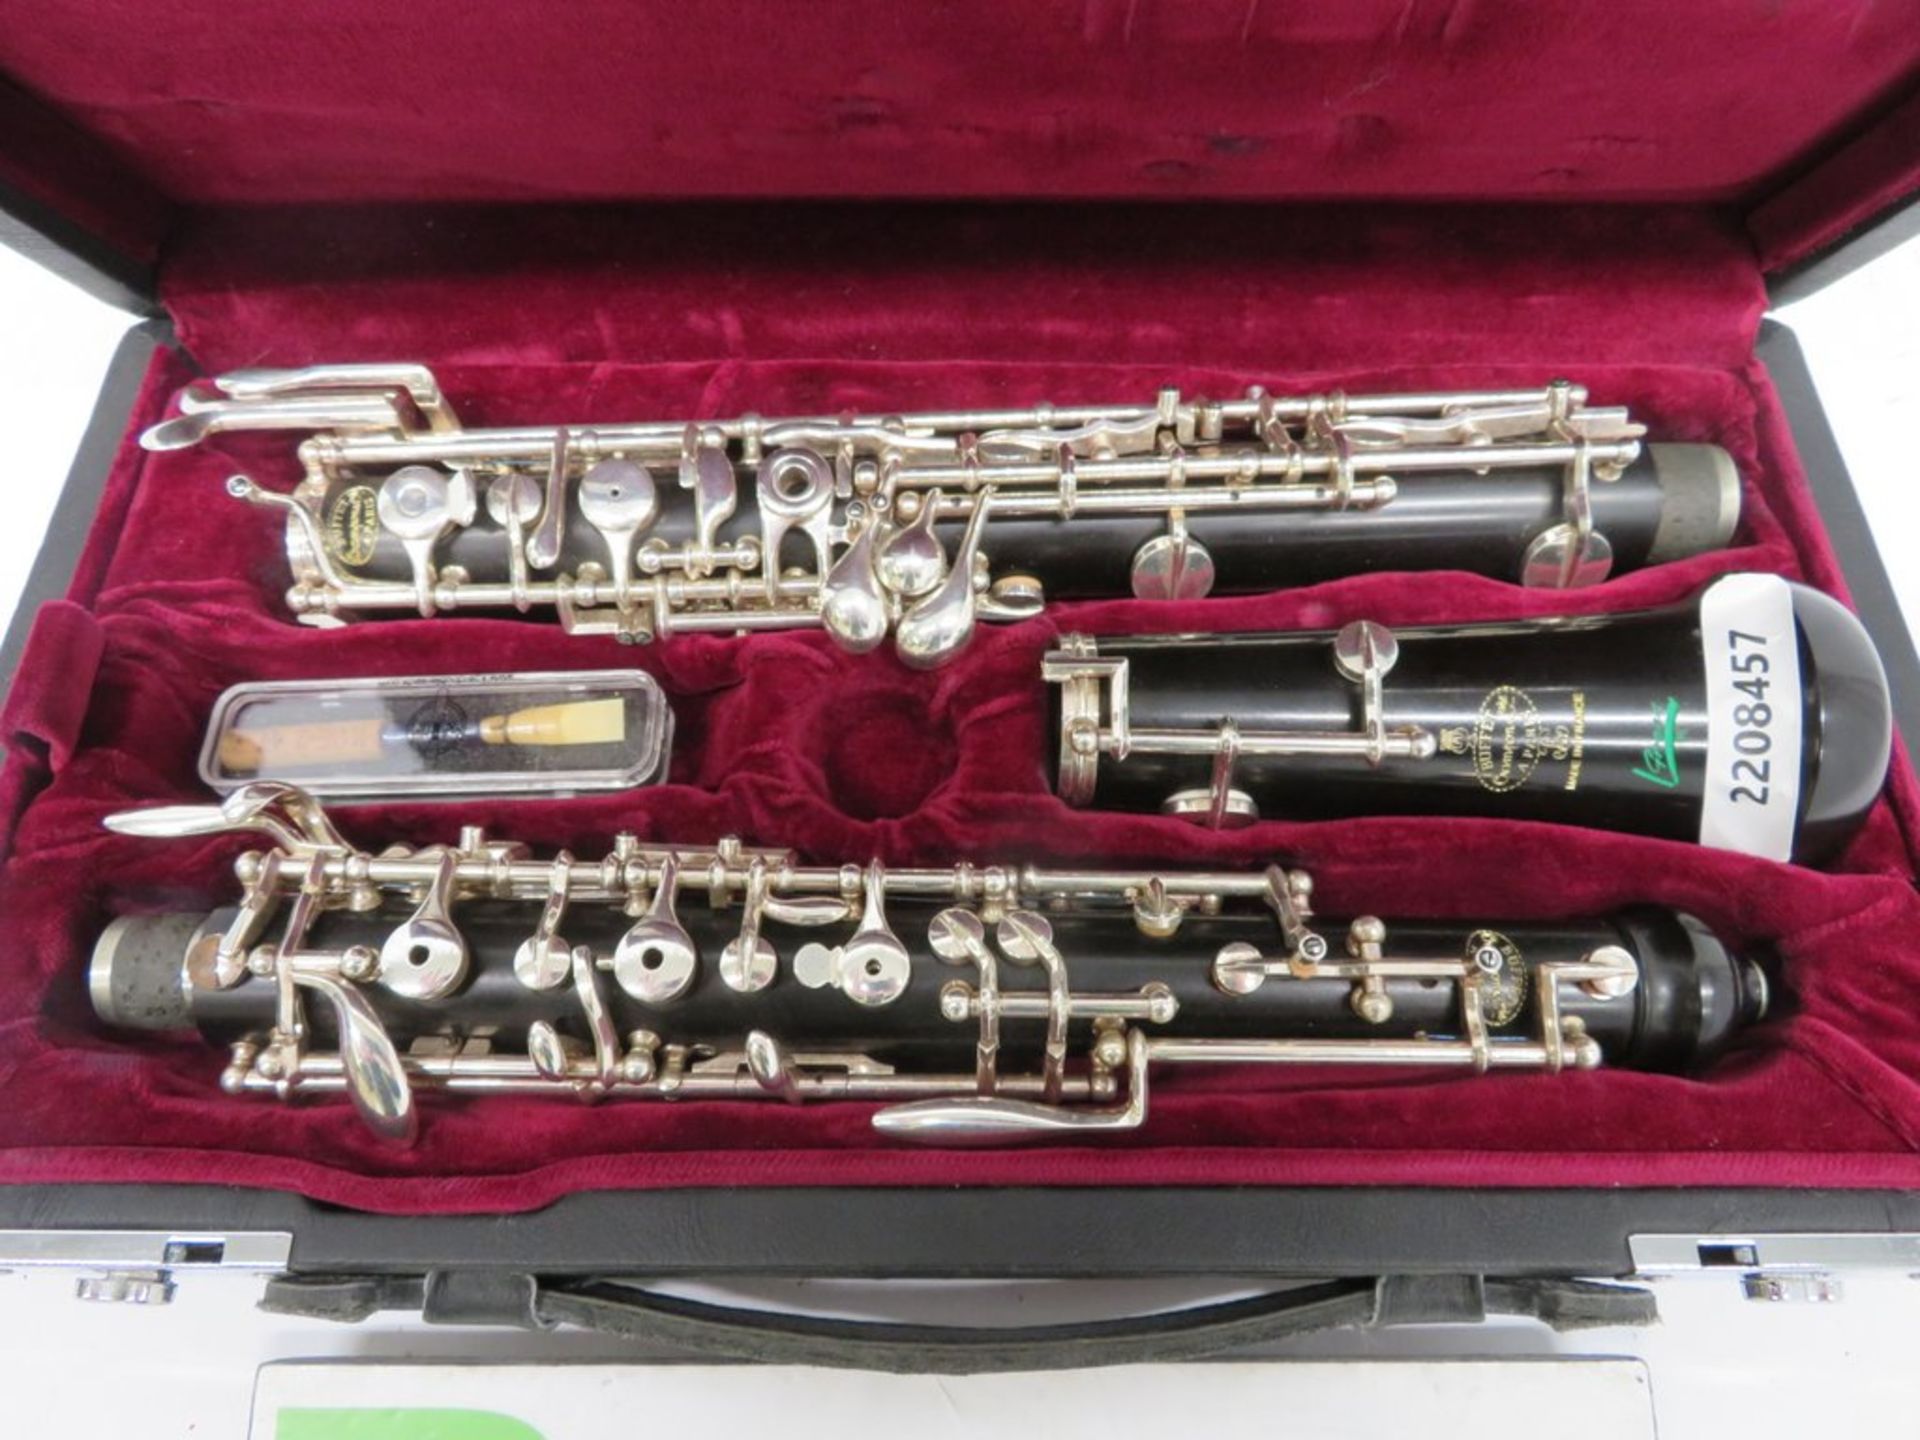 Buffet Green Line BC Oboe With Case. Serial Number: G11814. Please Note That This Item Has - Image 2 of 15